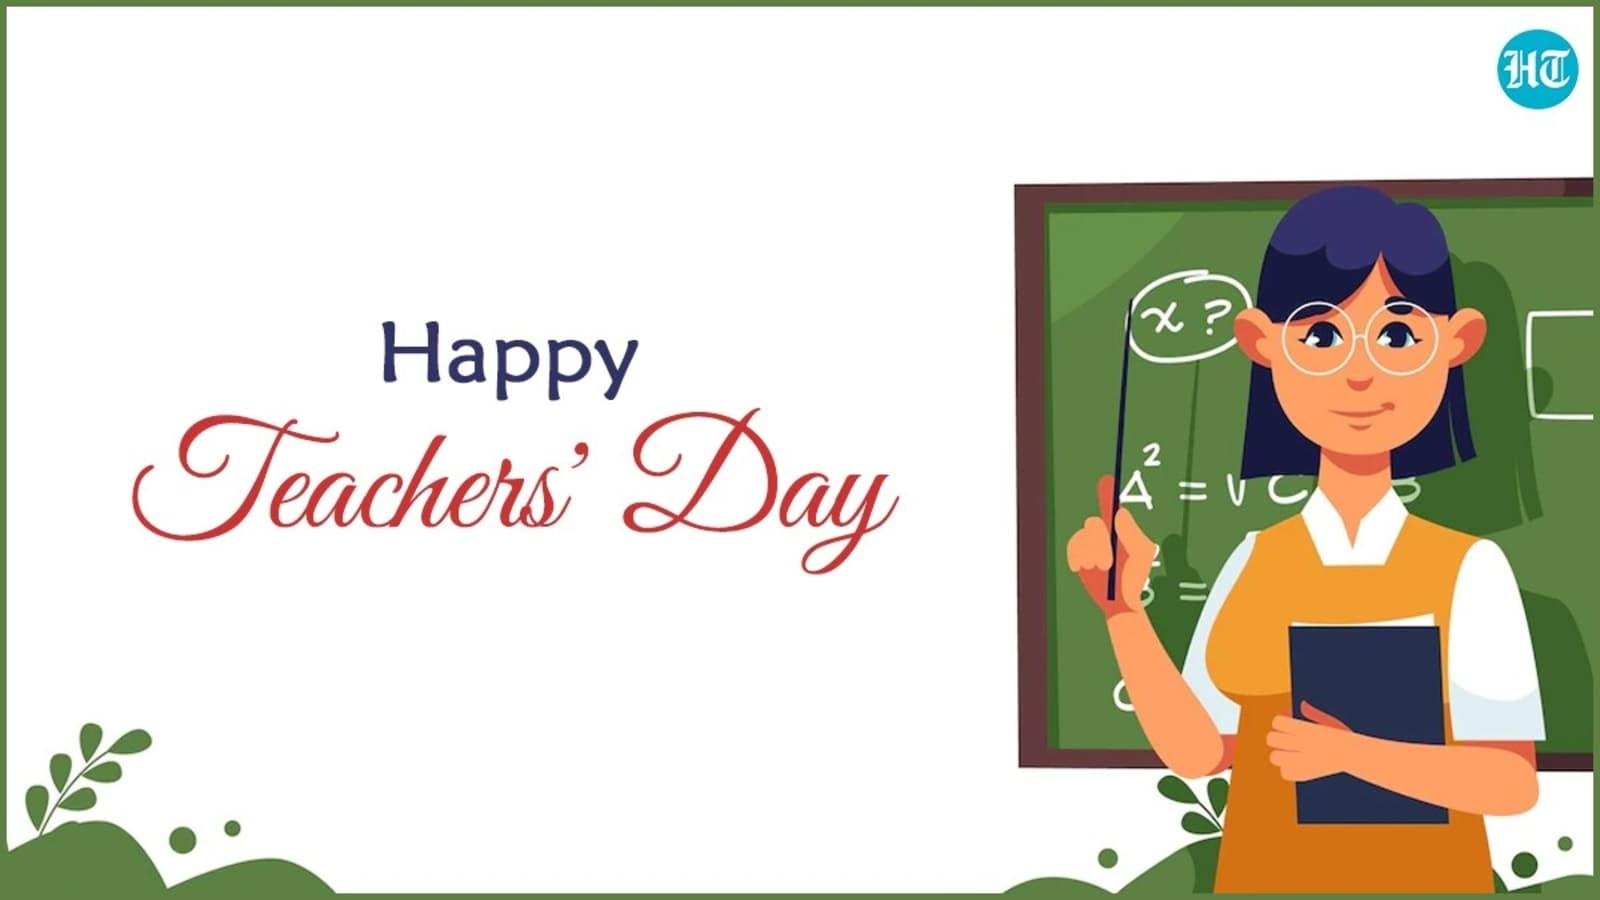 Happy Teachers' Day 2022: Best wishes, image, messages and greetings to share with your teachers on September 5